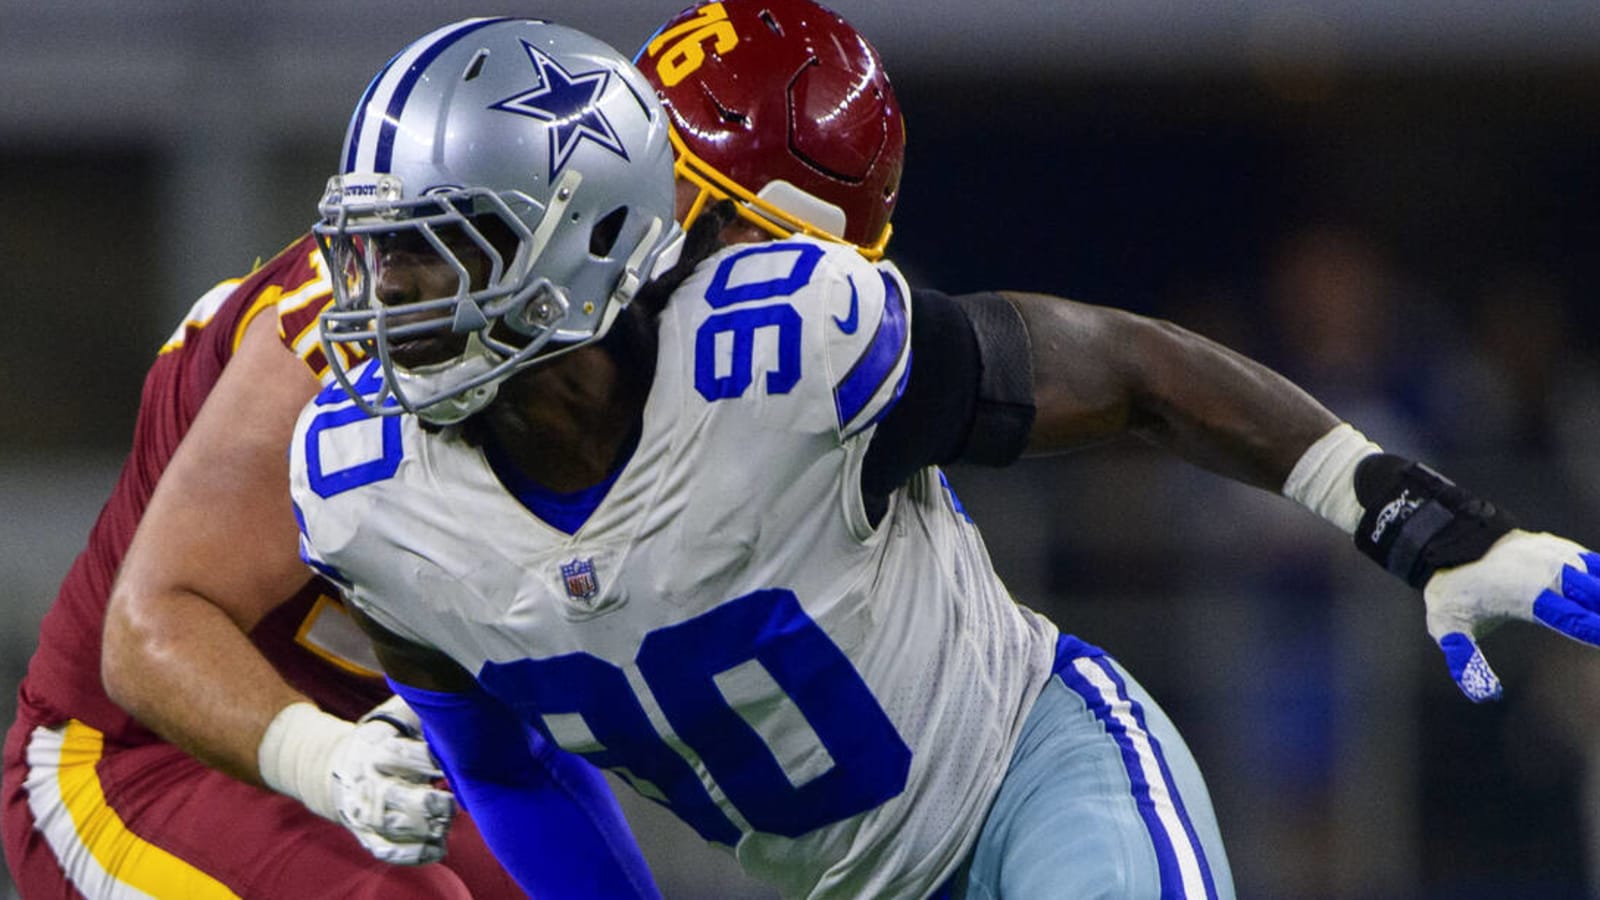  DeMarcus Lawrence rejects pay cut request from Cowboys